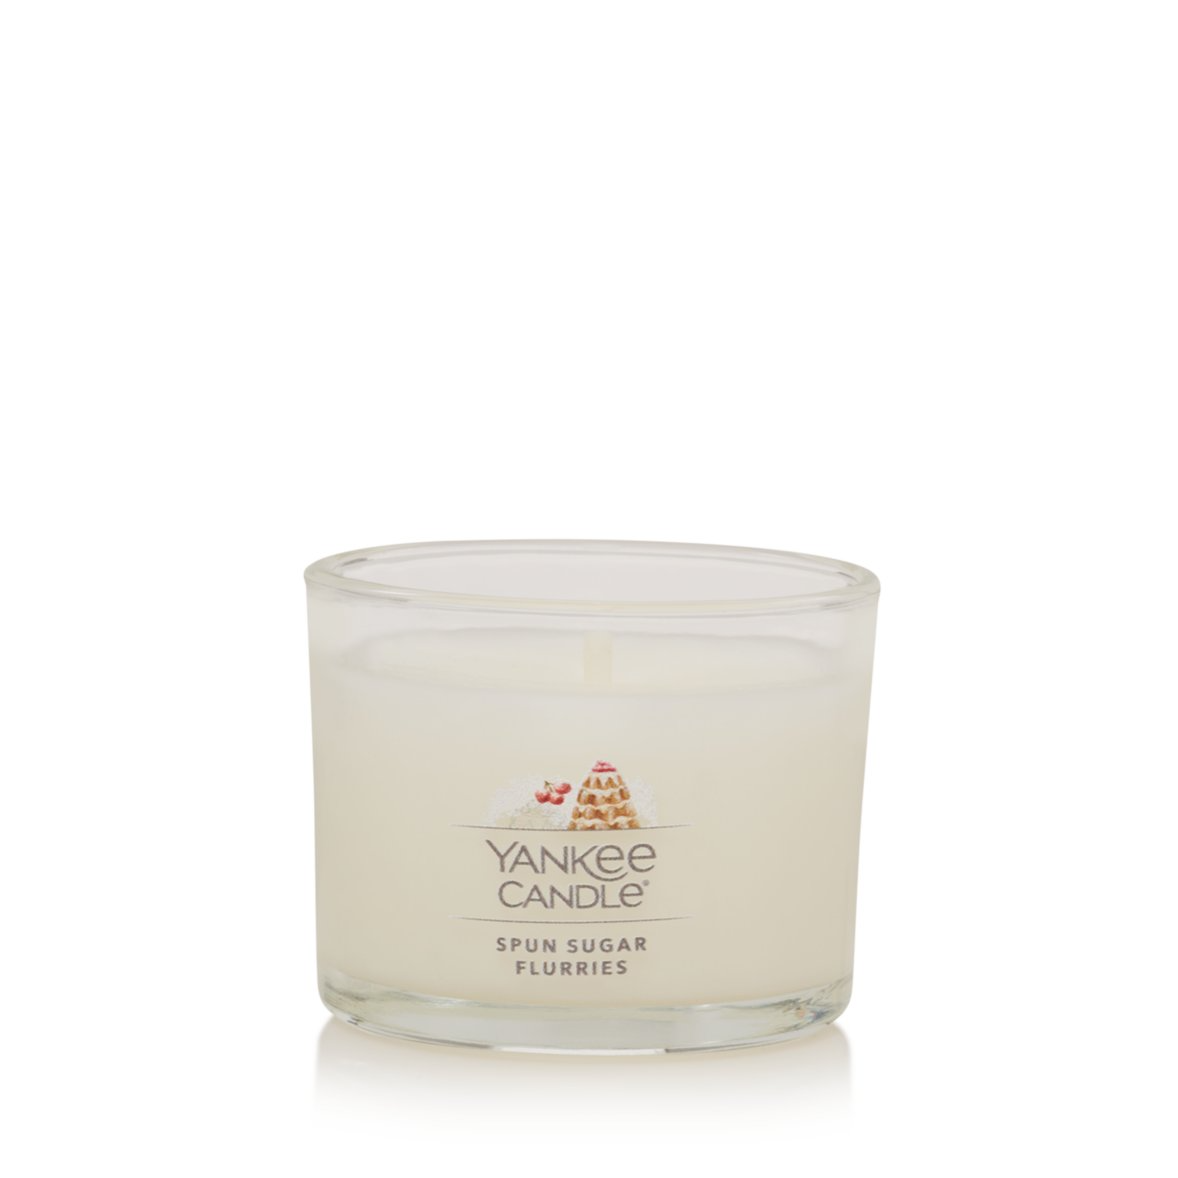 Scented Candle in Jar Yankee Candle Spun Sugar Flurries Jar Candle